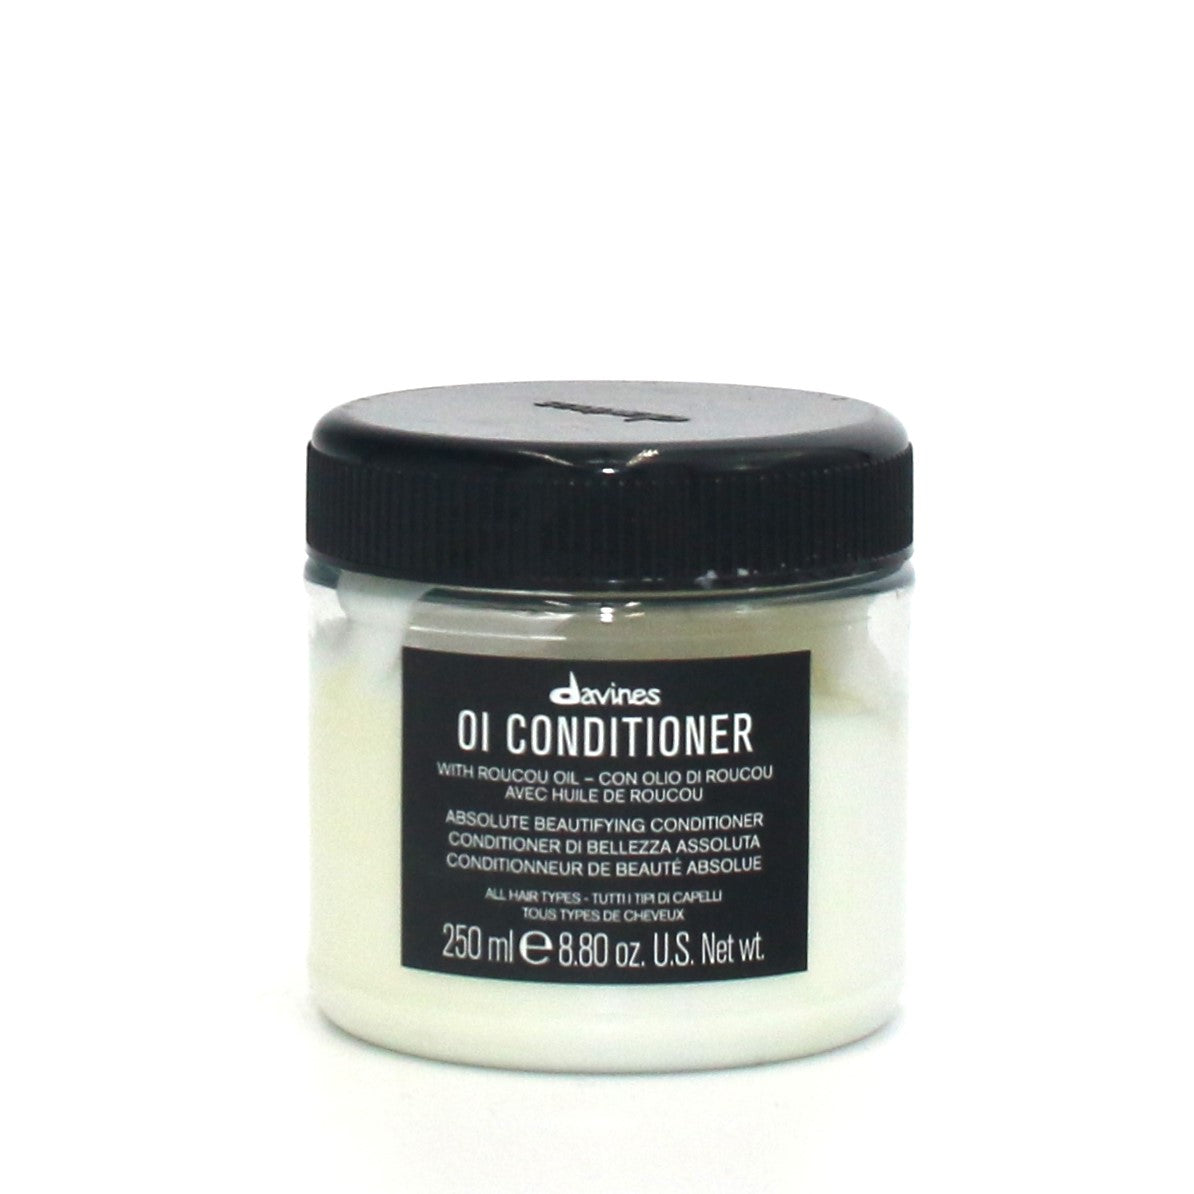 Davines Oi Conditioner Absoloute Beautifying with Roucou Oil 8.80 oz